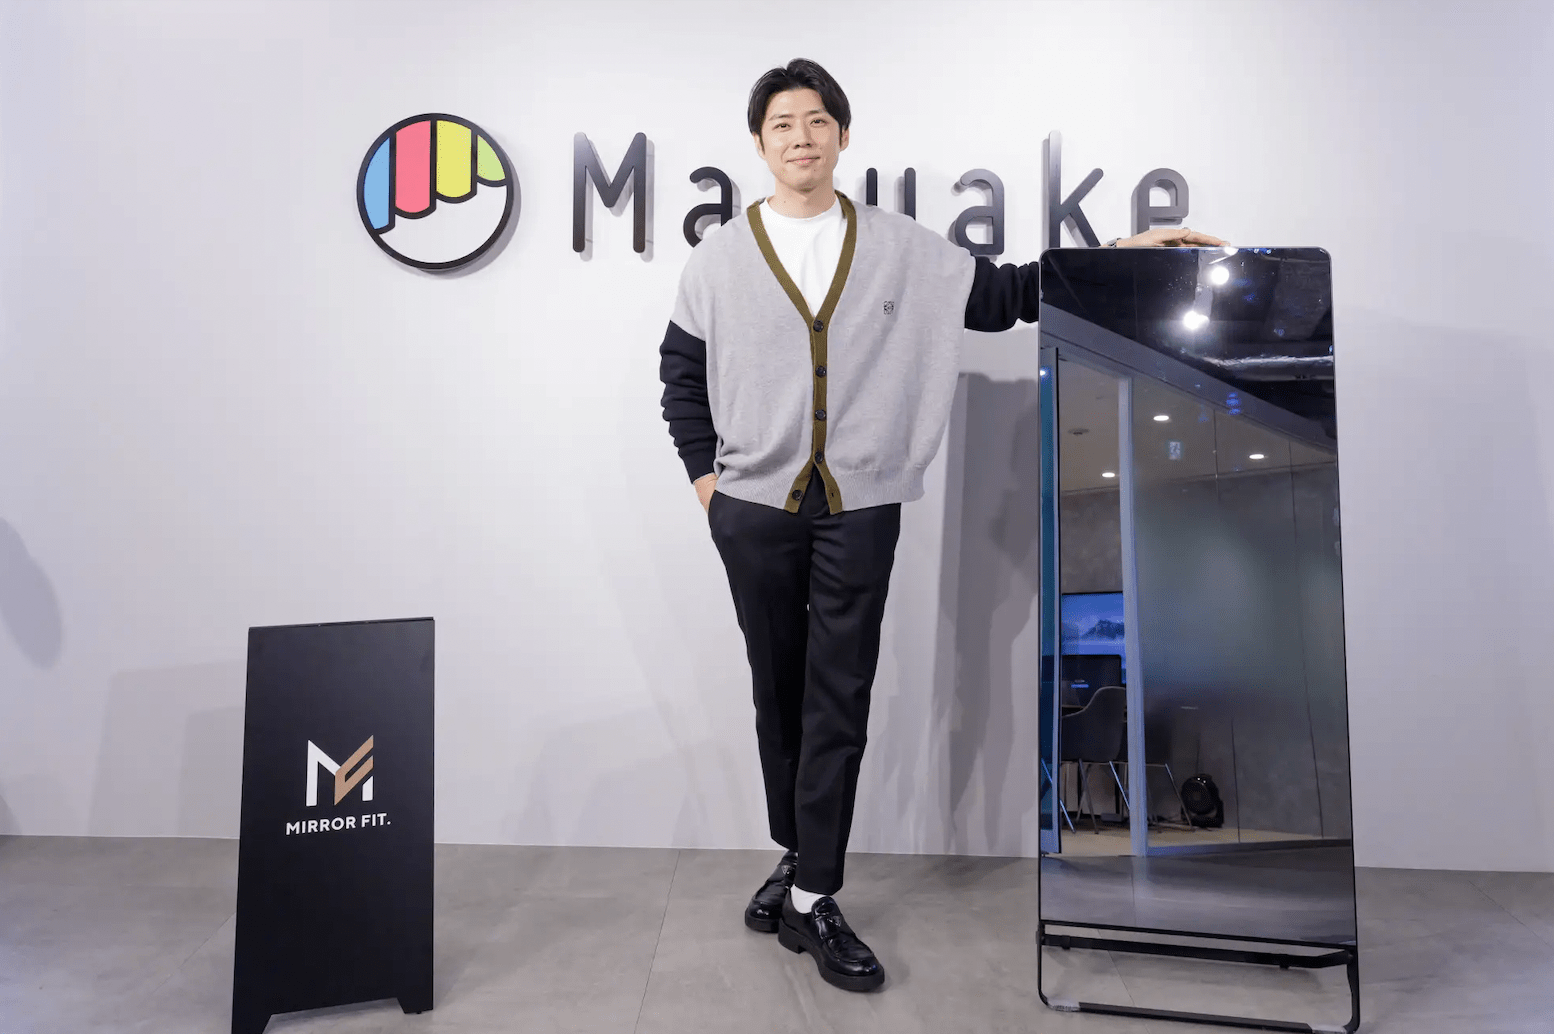 MIRROR FIT. 応援購入サービス「Makuake」にて、先行販売 開始から 